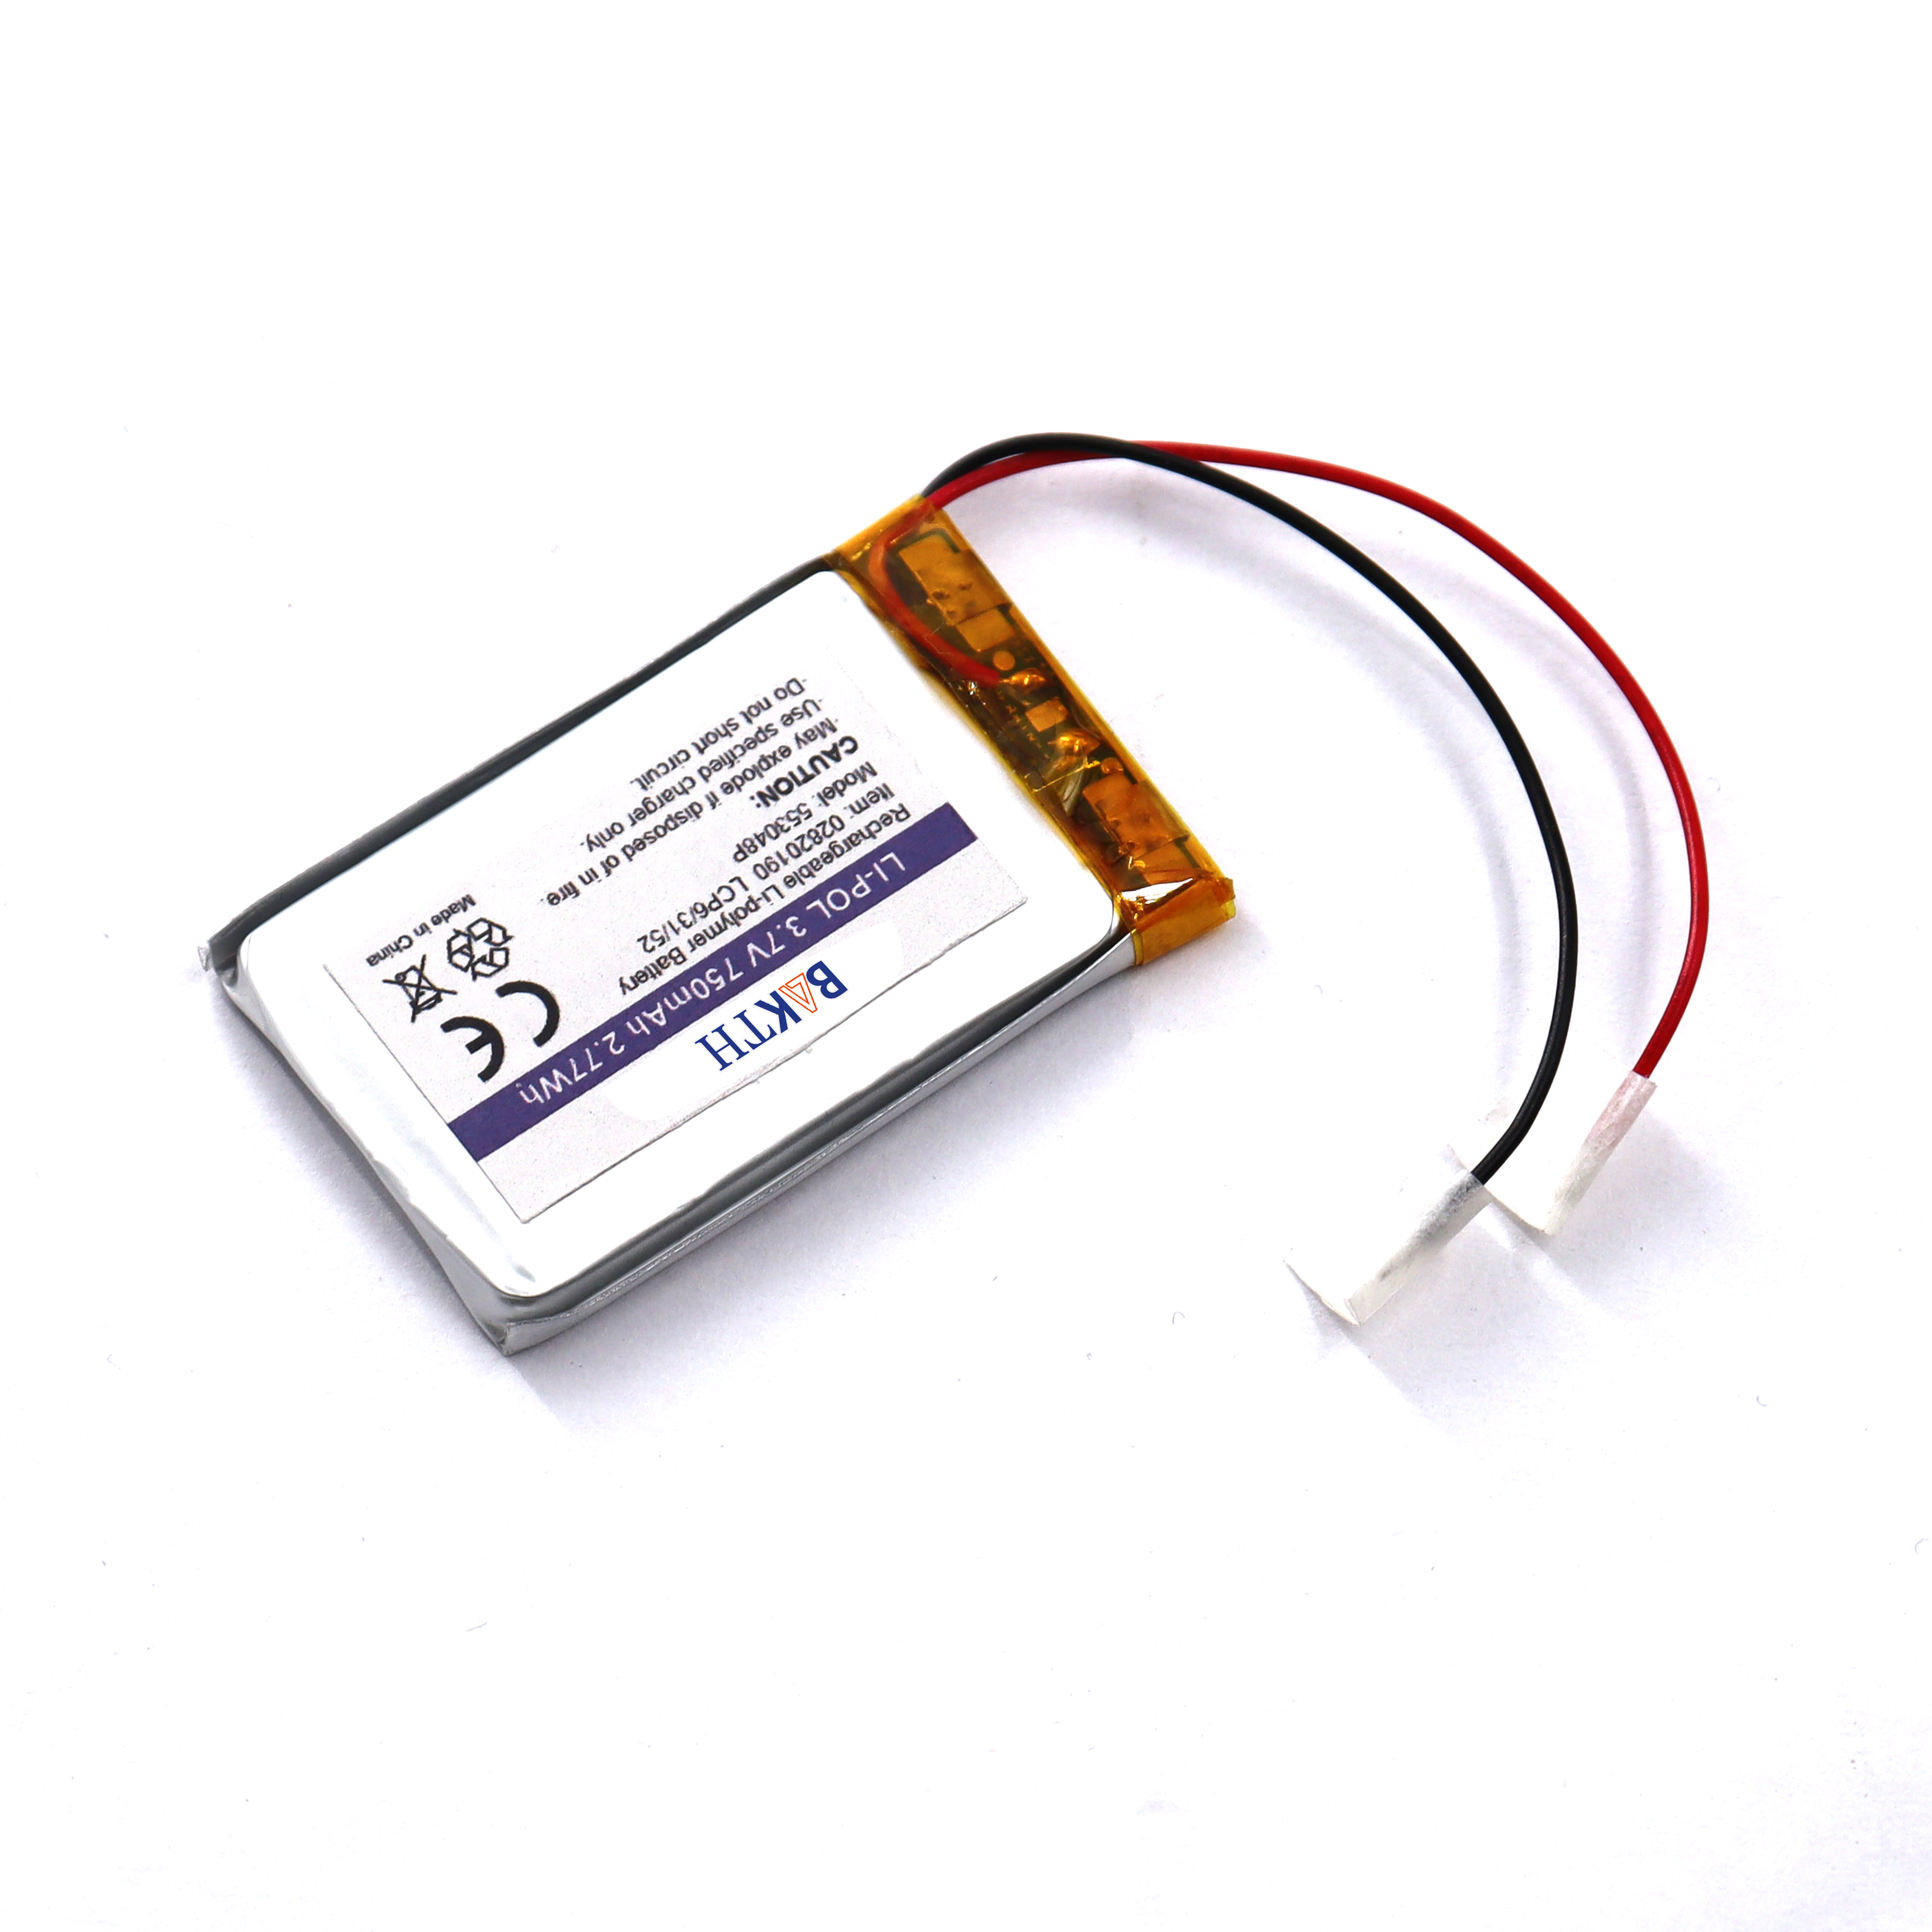 3.7V 750mAh Rechargeable lithium polymer battery for GPS tracking